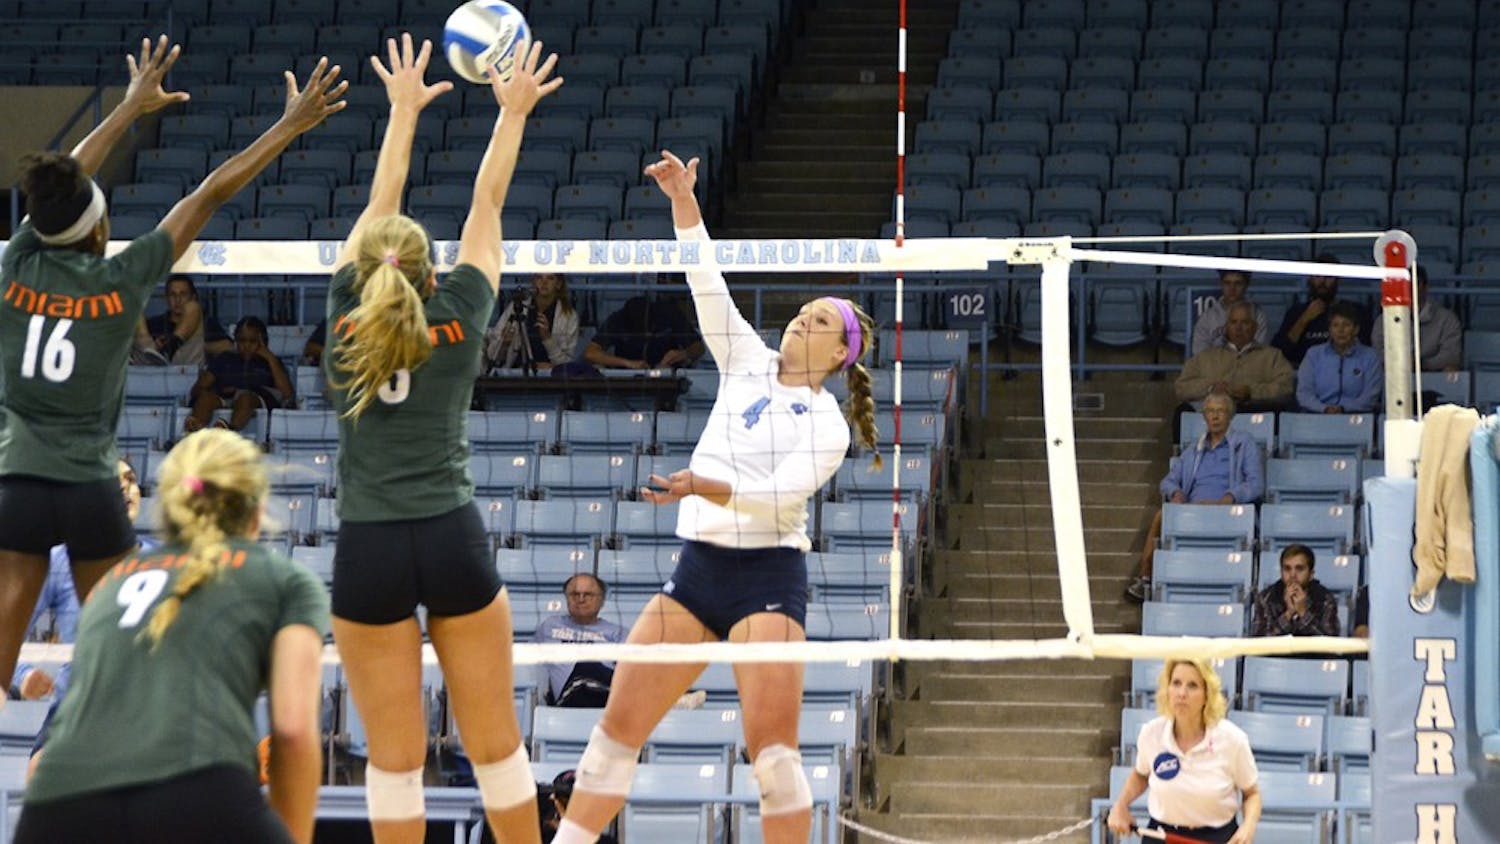 Leigh Andrew, a junior outside hitter, spikes a ball against Miami on Friday. UNC won 3-0 against the Miami Hurricanes.